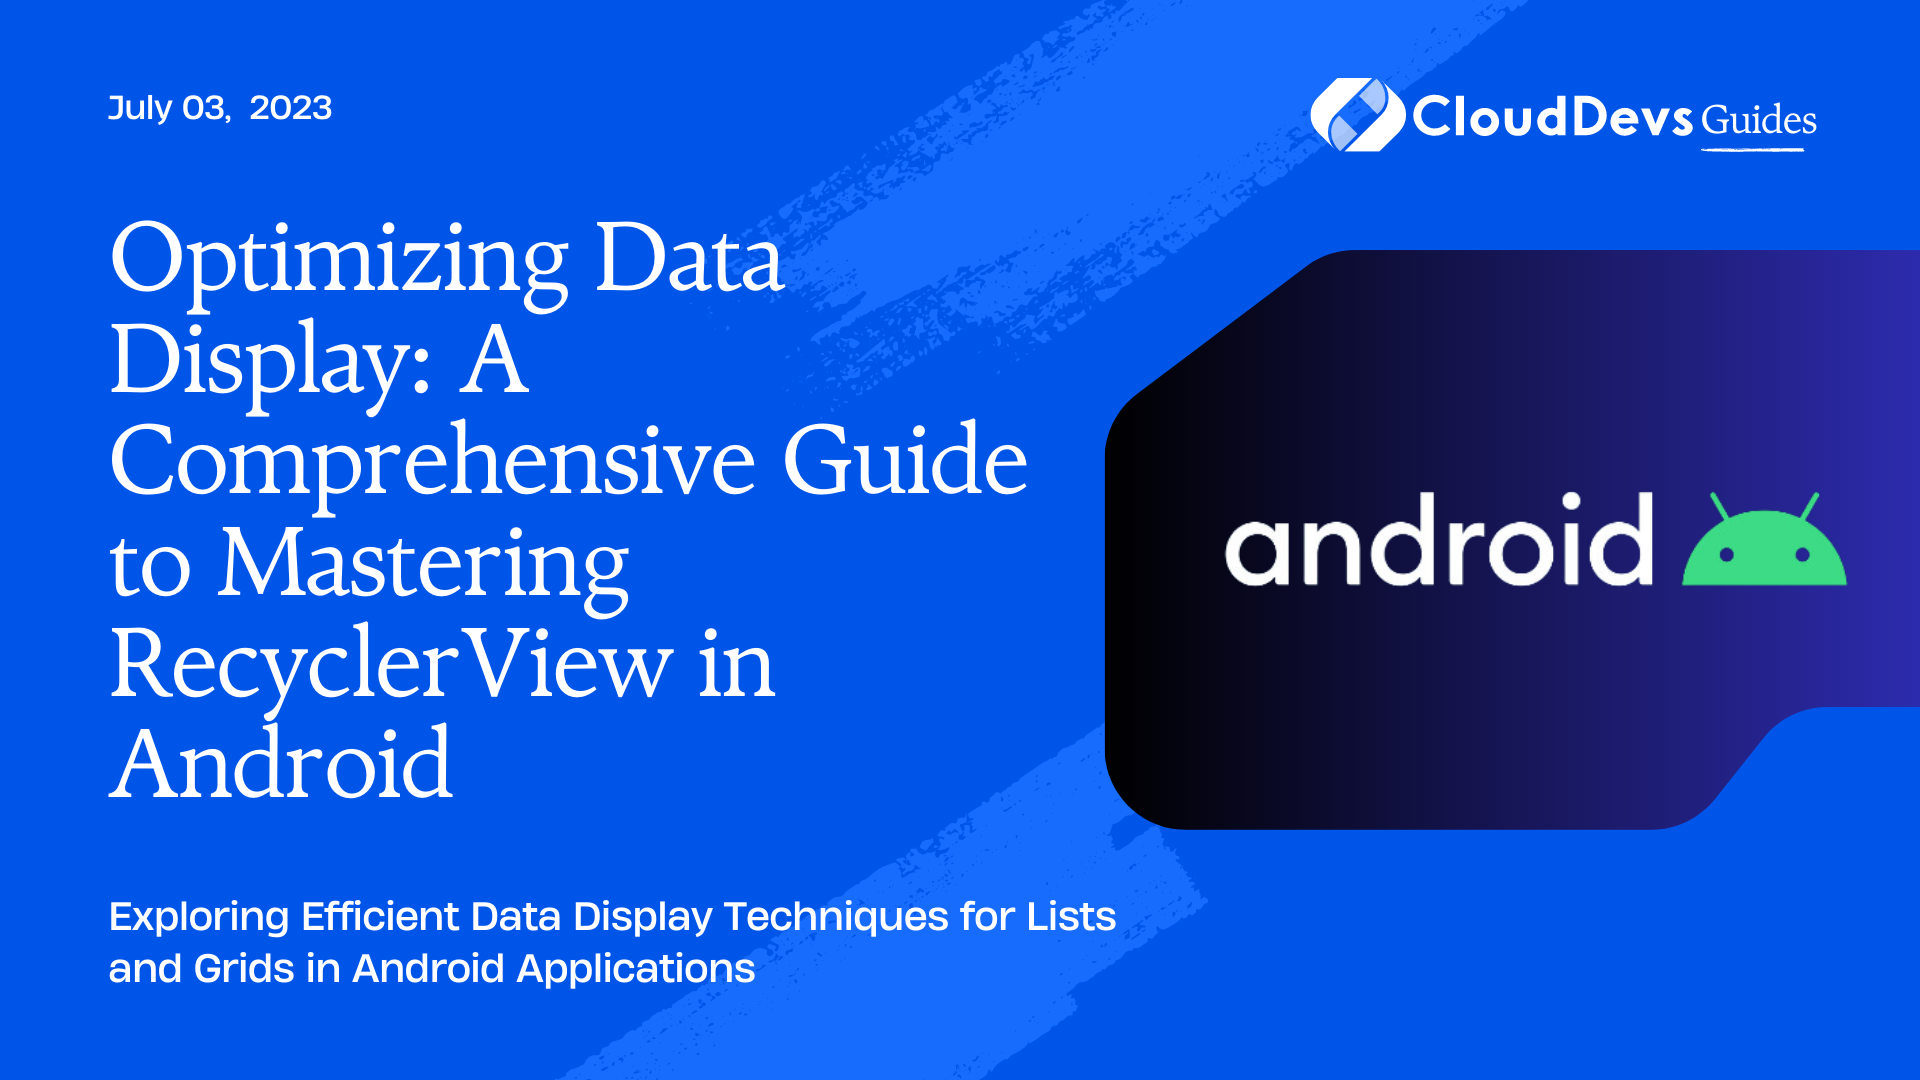 Optimizing Data Display: A Comprehensive Guide to Mastering RecyclerView in Android